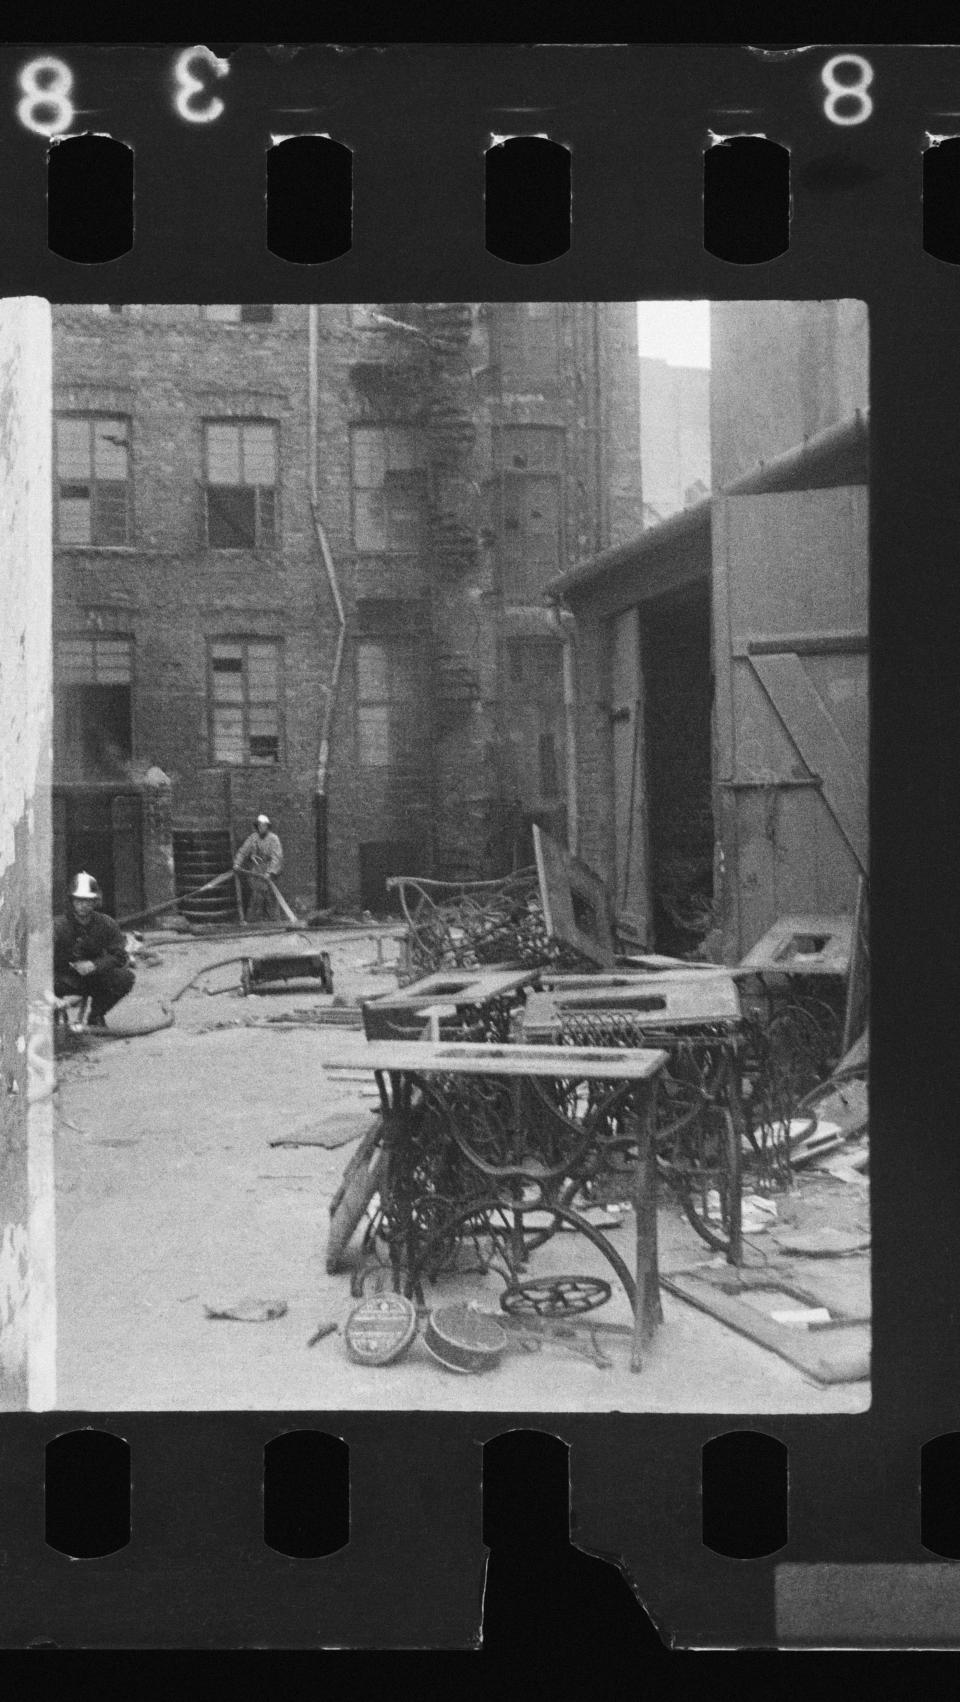 This undated handout negative taken by Polish firefighter Zbigniew Leszek Grzywaczewski negative shows the ghetto of Warsaw during the uprising of 1943, in Warsaw, Poland. On Wednesday, Jan. 18, 2023, Warsaw’s Jewish history museum presented a group of photographs taken in secret during the Warsaw Ghetto Uprising of 1943, some of which have never been seen before, that were recently discovered in a family collection.(Z. L. Grzywaczewski/courtesy of Maciej Grzywaczewski/POLIN Museum via AP)